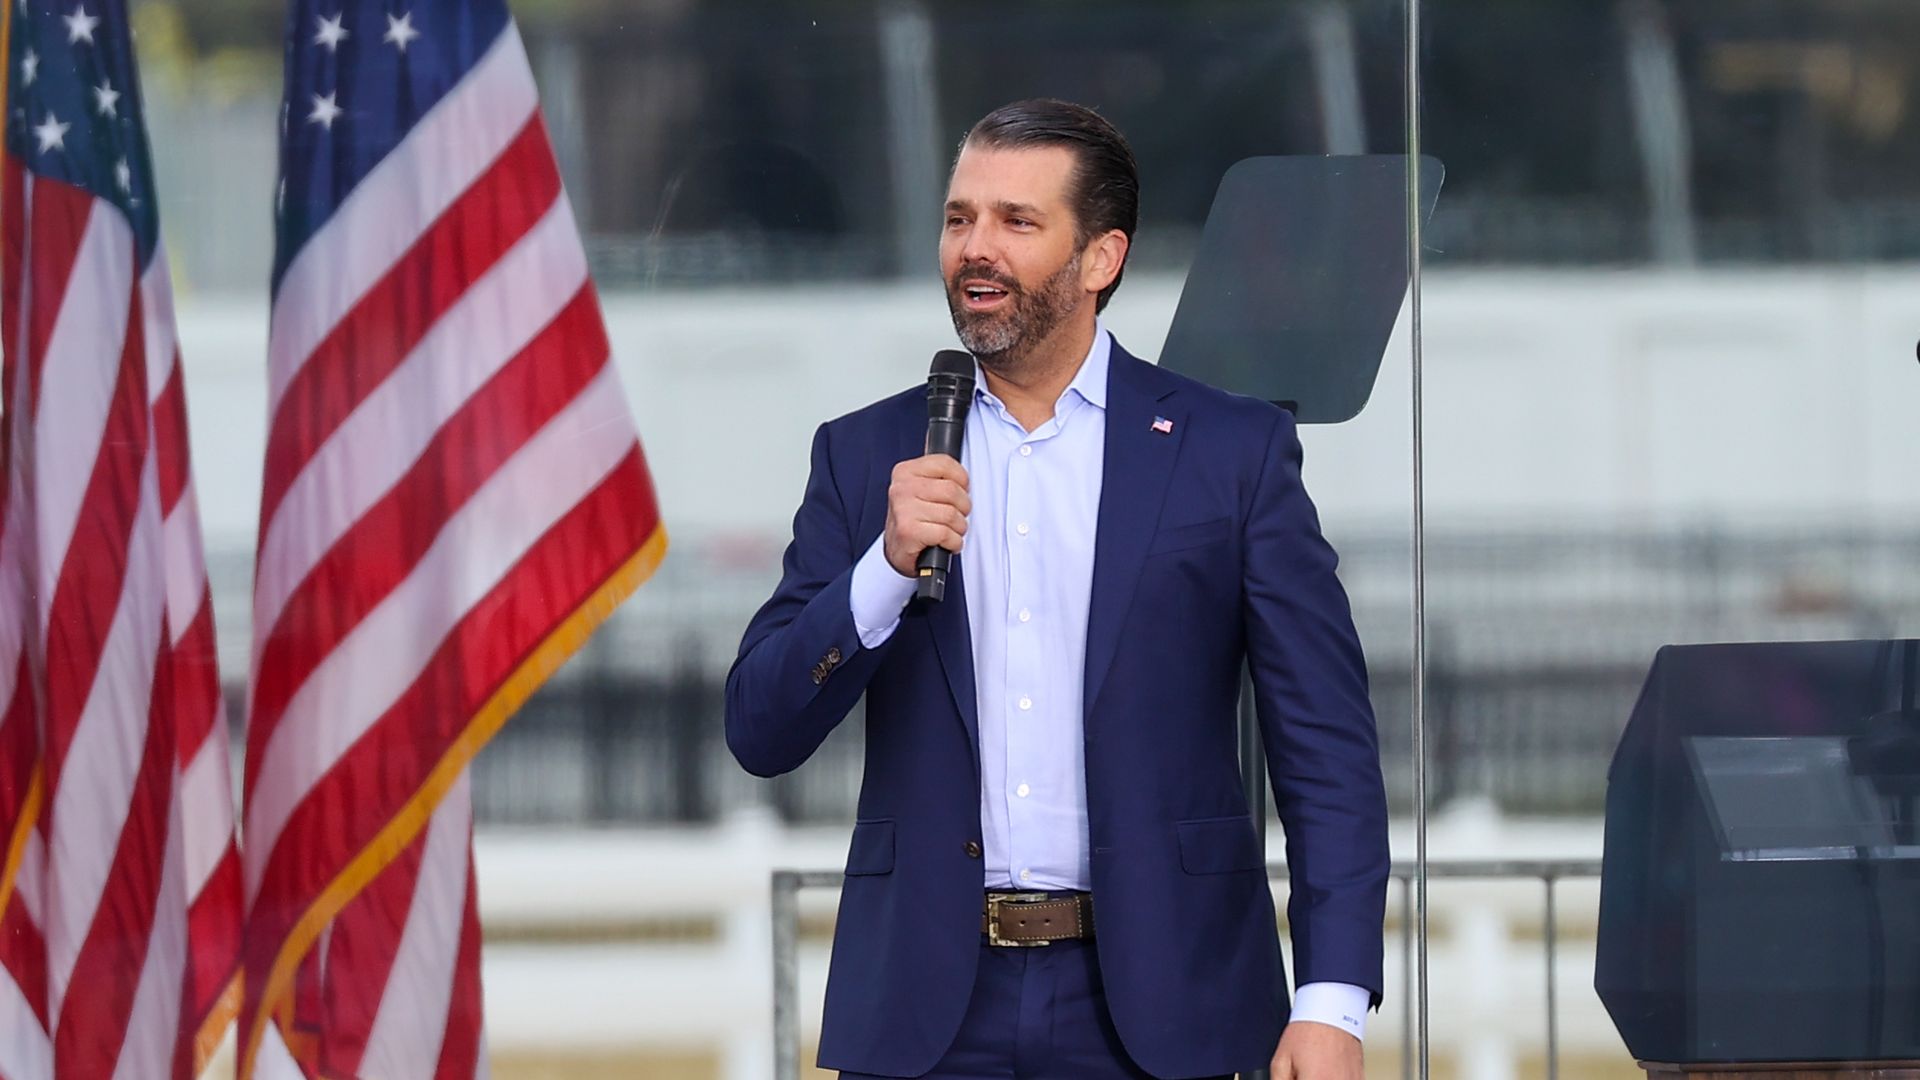 Donald Trump Jr., executive vice president of development and acquisitions for Trump Organization Inc., speaks during a "Save America Rally" near the White House in Washington, D.C., U.S., 